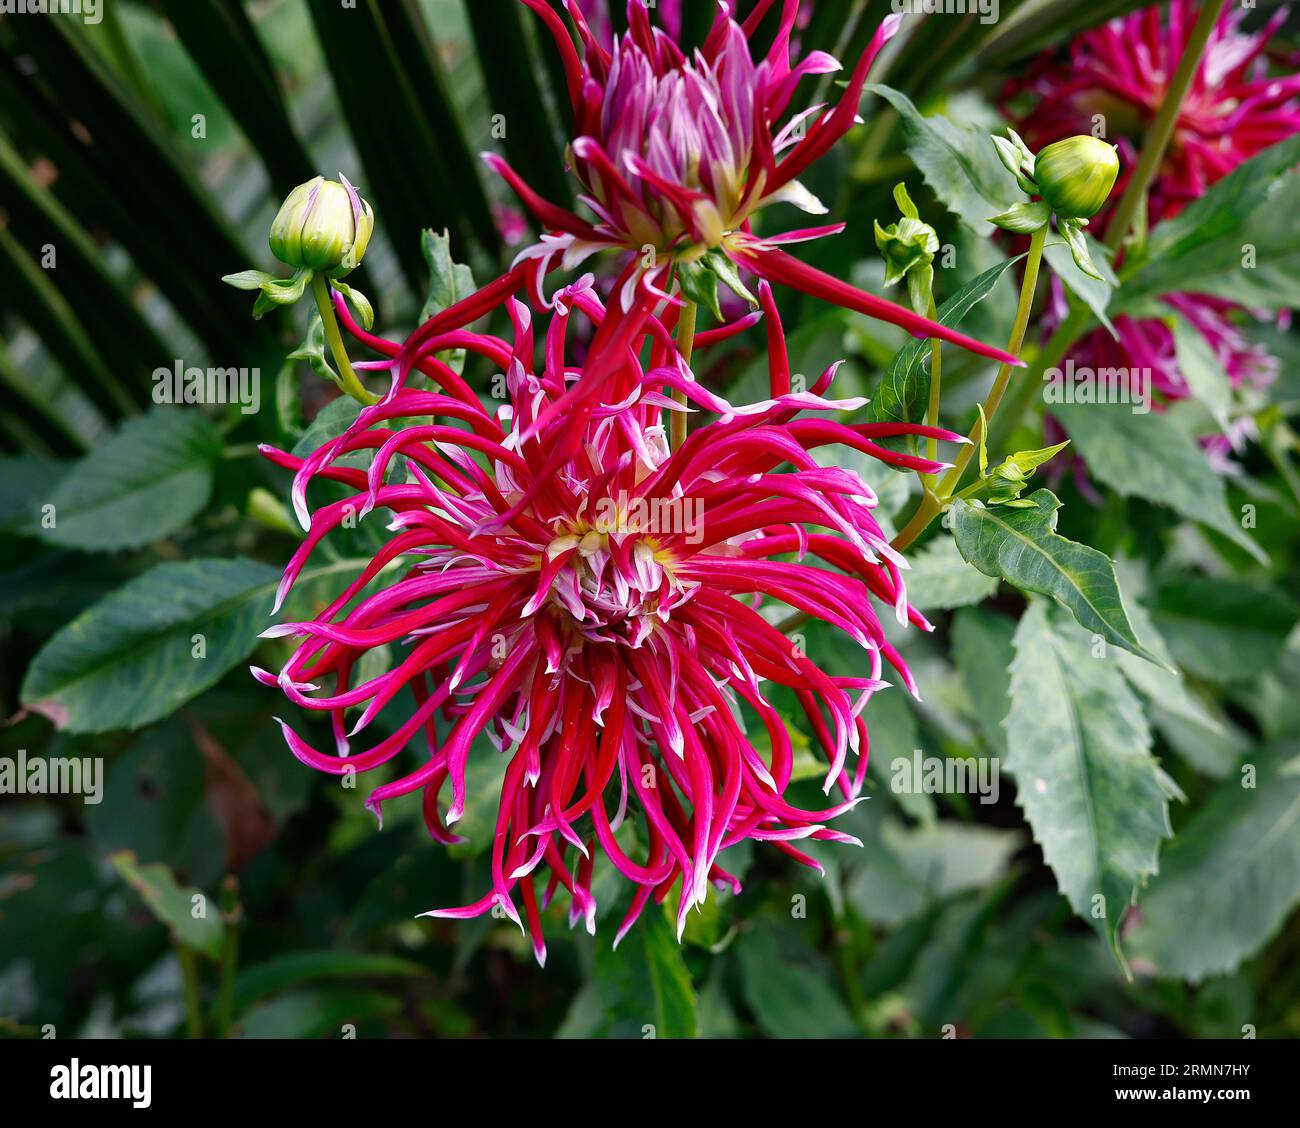 Closeup of the maroon and white spidery shaped petals of the tender perennial tuberous garden plant cactus dahlia hollyhill spiderwoman. Stock Photo